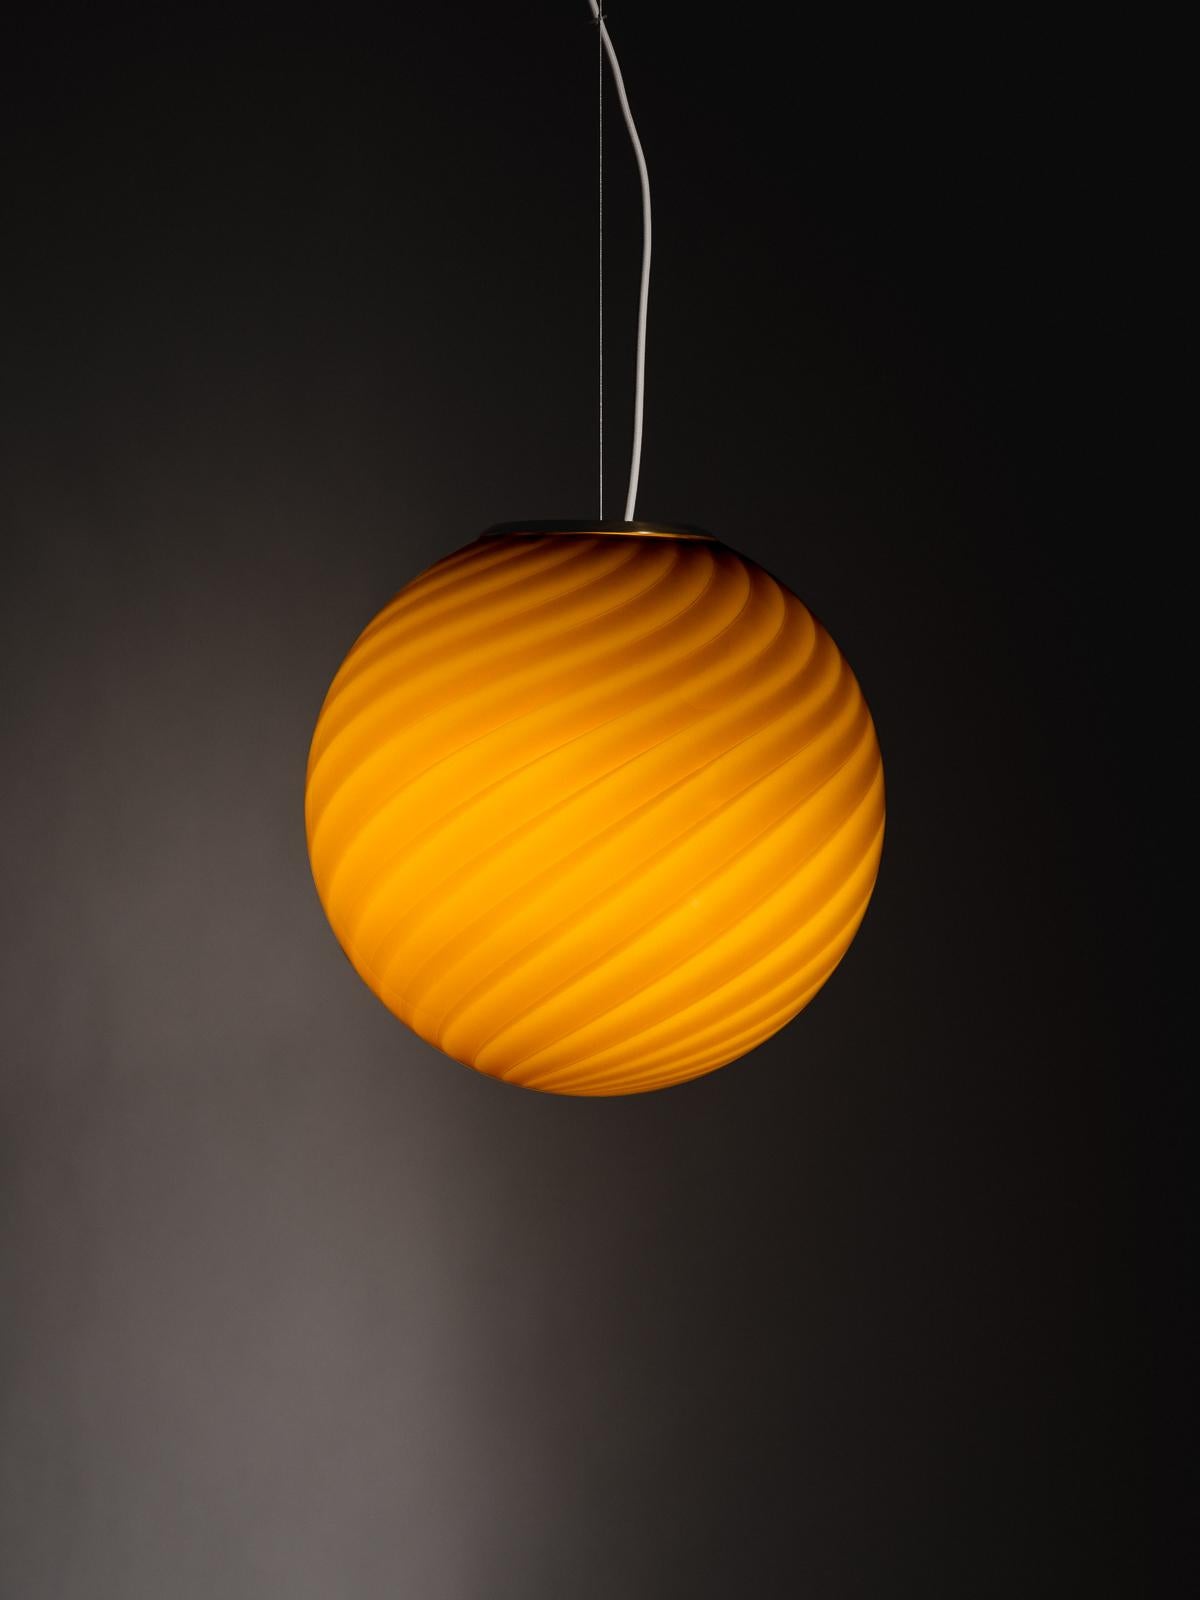 A limited edition of 50, this sculptural sphere-shaped pendant ceiling lamp is crafted from mouth-blown opaline glass in Ambra: a bright and warm hue with golden undertones. The lamp features an original swirl pattern obtained using a 1970s mould